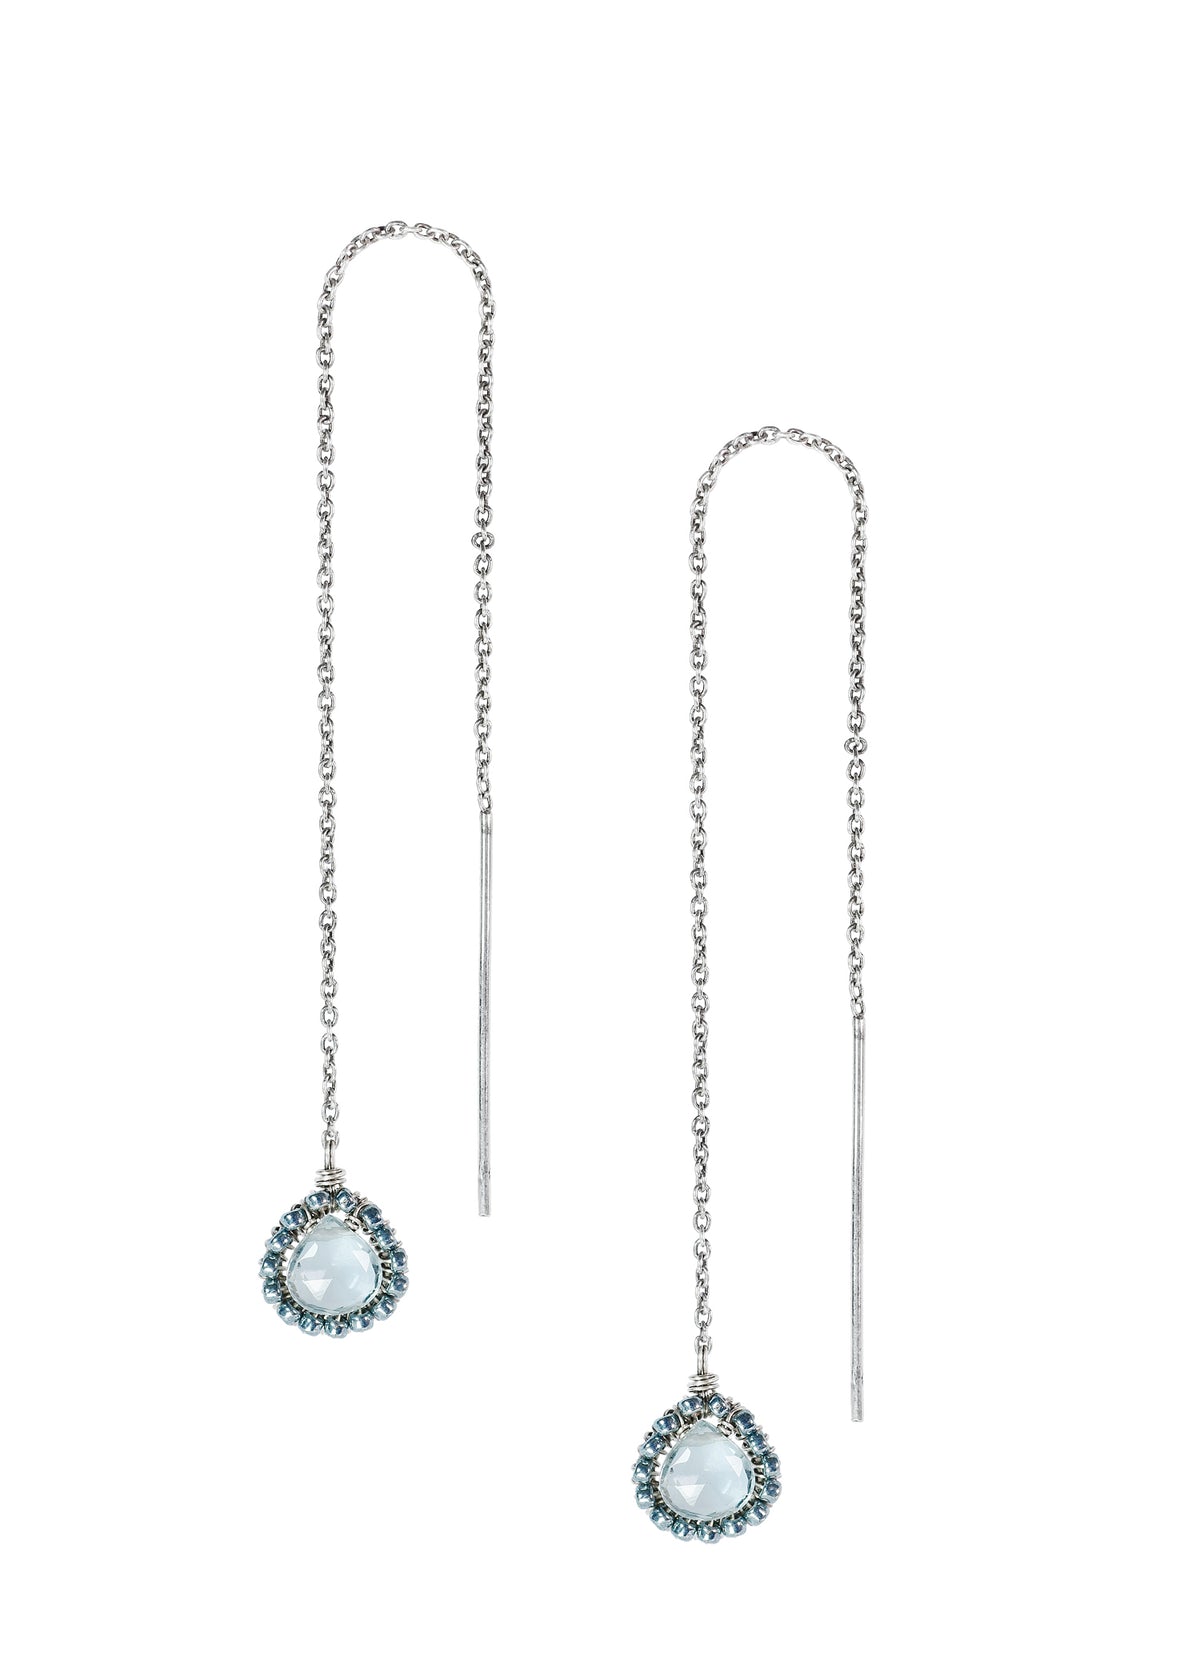 Aqua quartz Seed beads Sterling silver Earrings measure 5-1/4&quot; in length and 3/8&quot; in width across the widest point of the drop Handmade in our Los Angeles studio